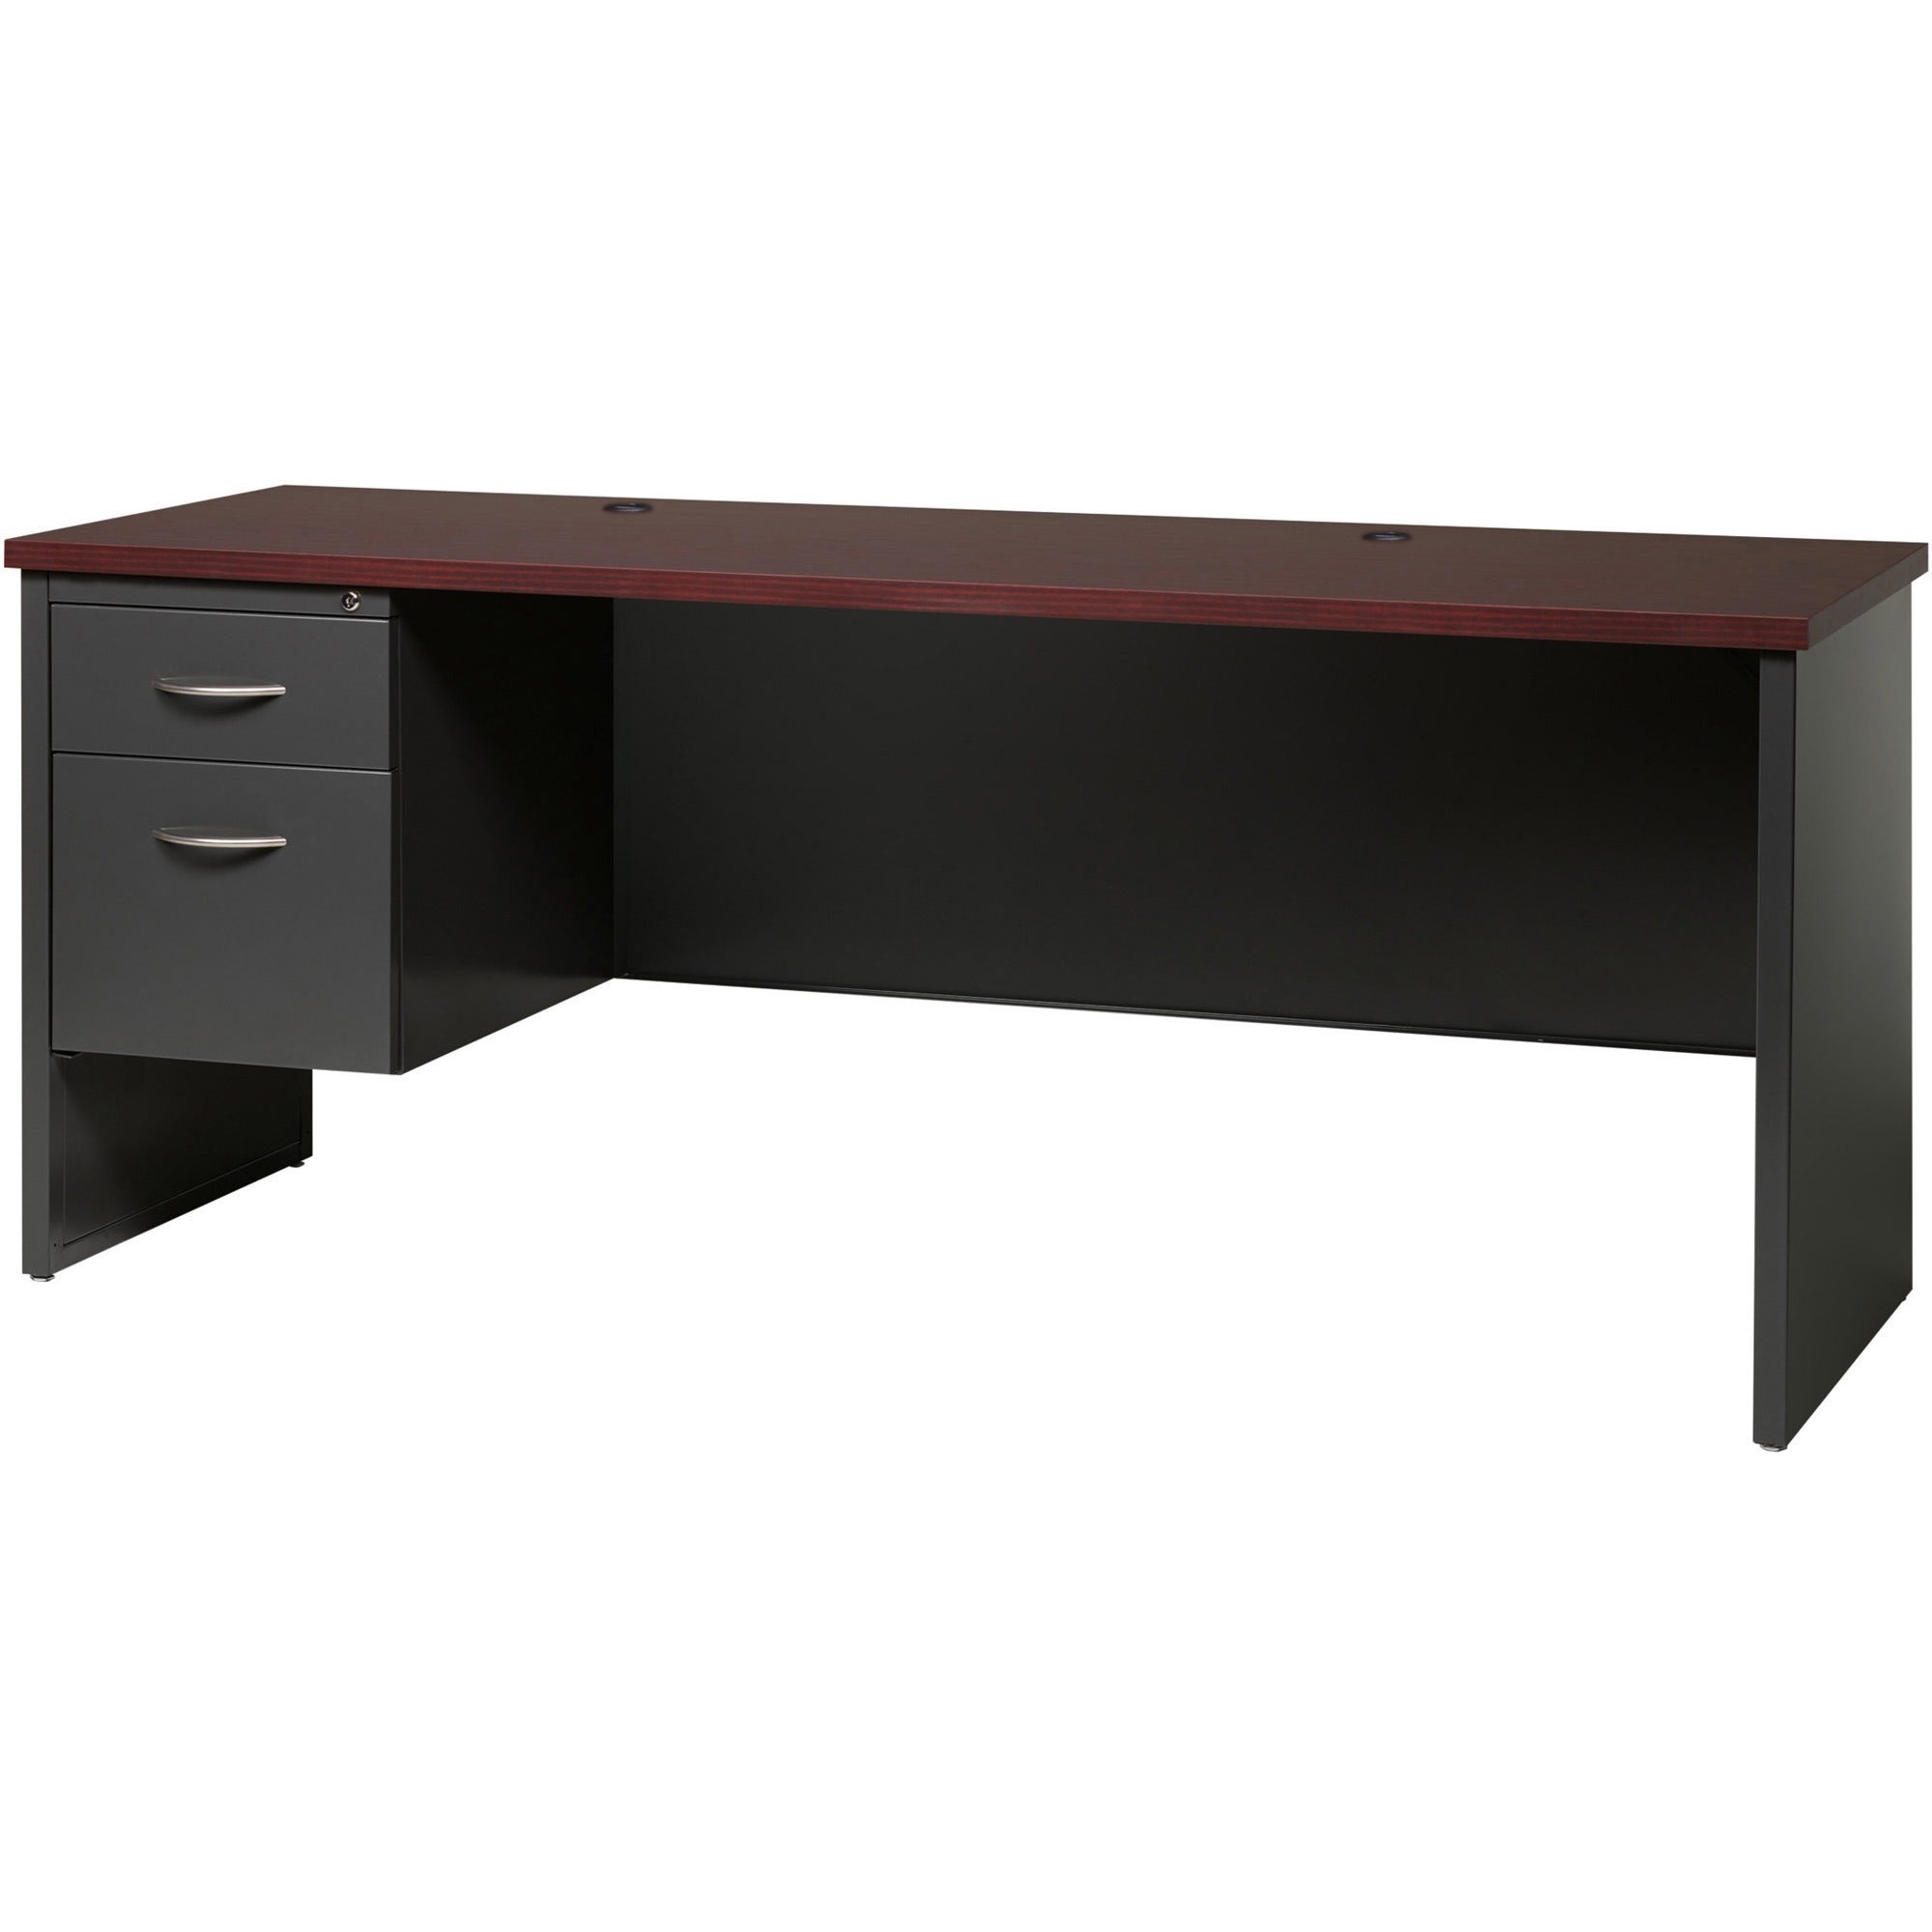 Lorell Fortress Modular Series Left-pedestal Credenza - 72" x 24" , 1.1" Top - 2 x Box, File Drawer(s) - Single Pedestal on Left Side - Material: Steel - Finish: Mahogany Laminate, Charcoal - Scratch Resistant, Stain Resistant, Ball-bearing Suspensio - 